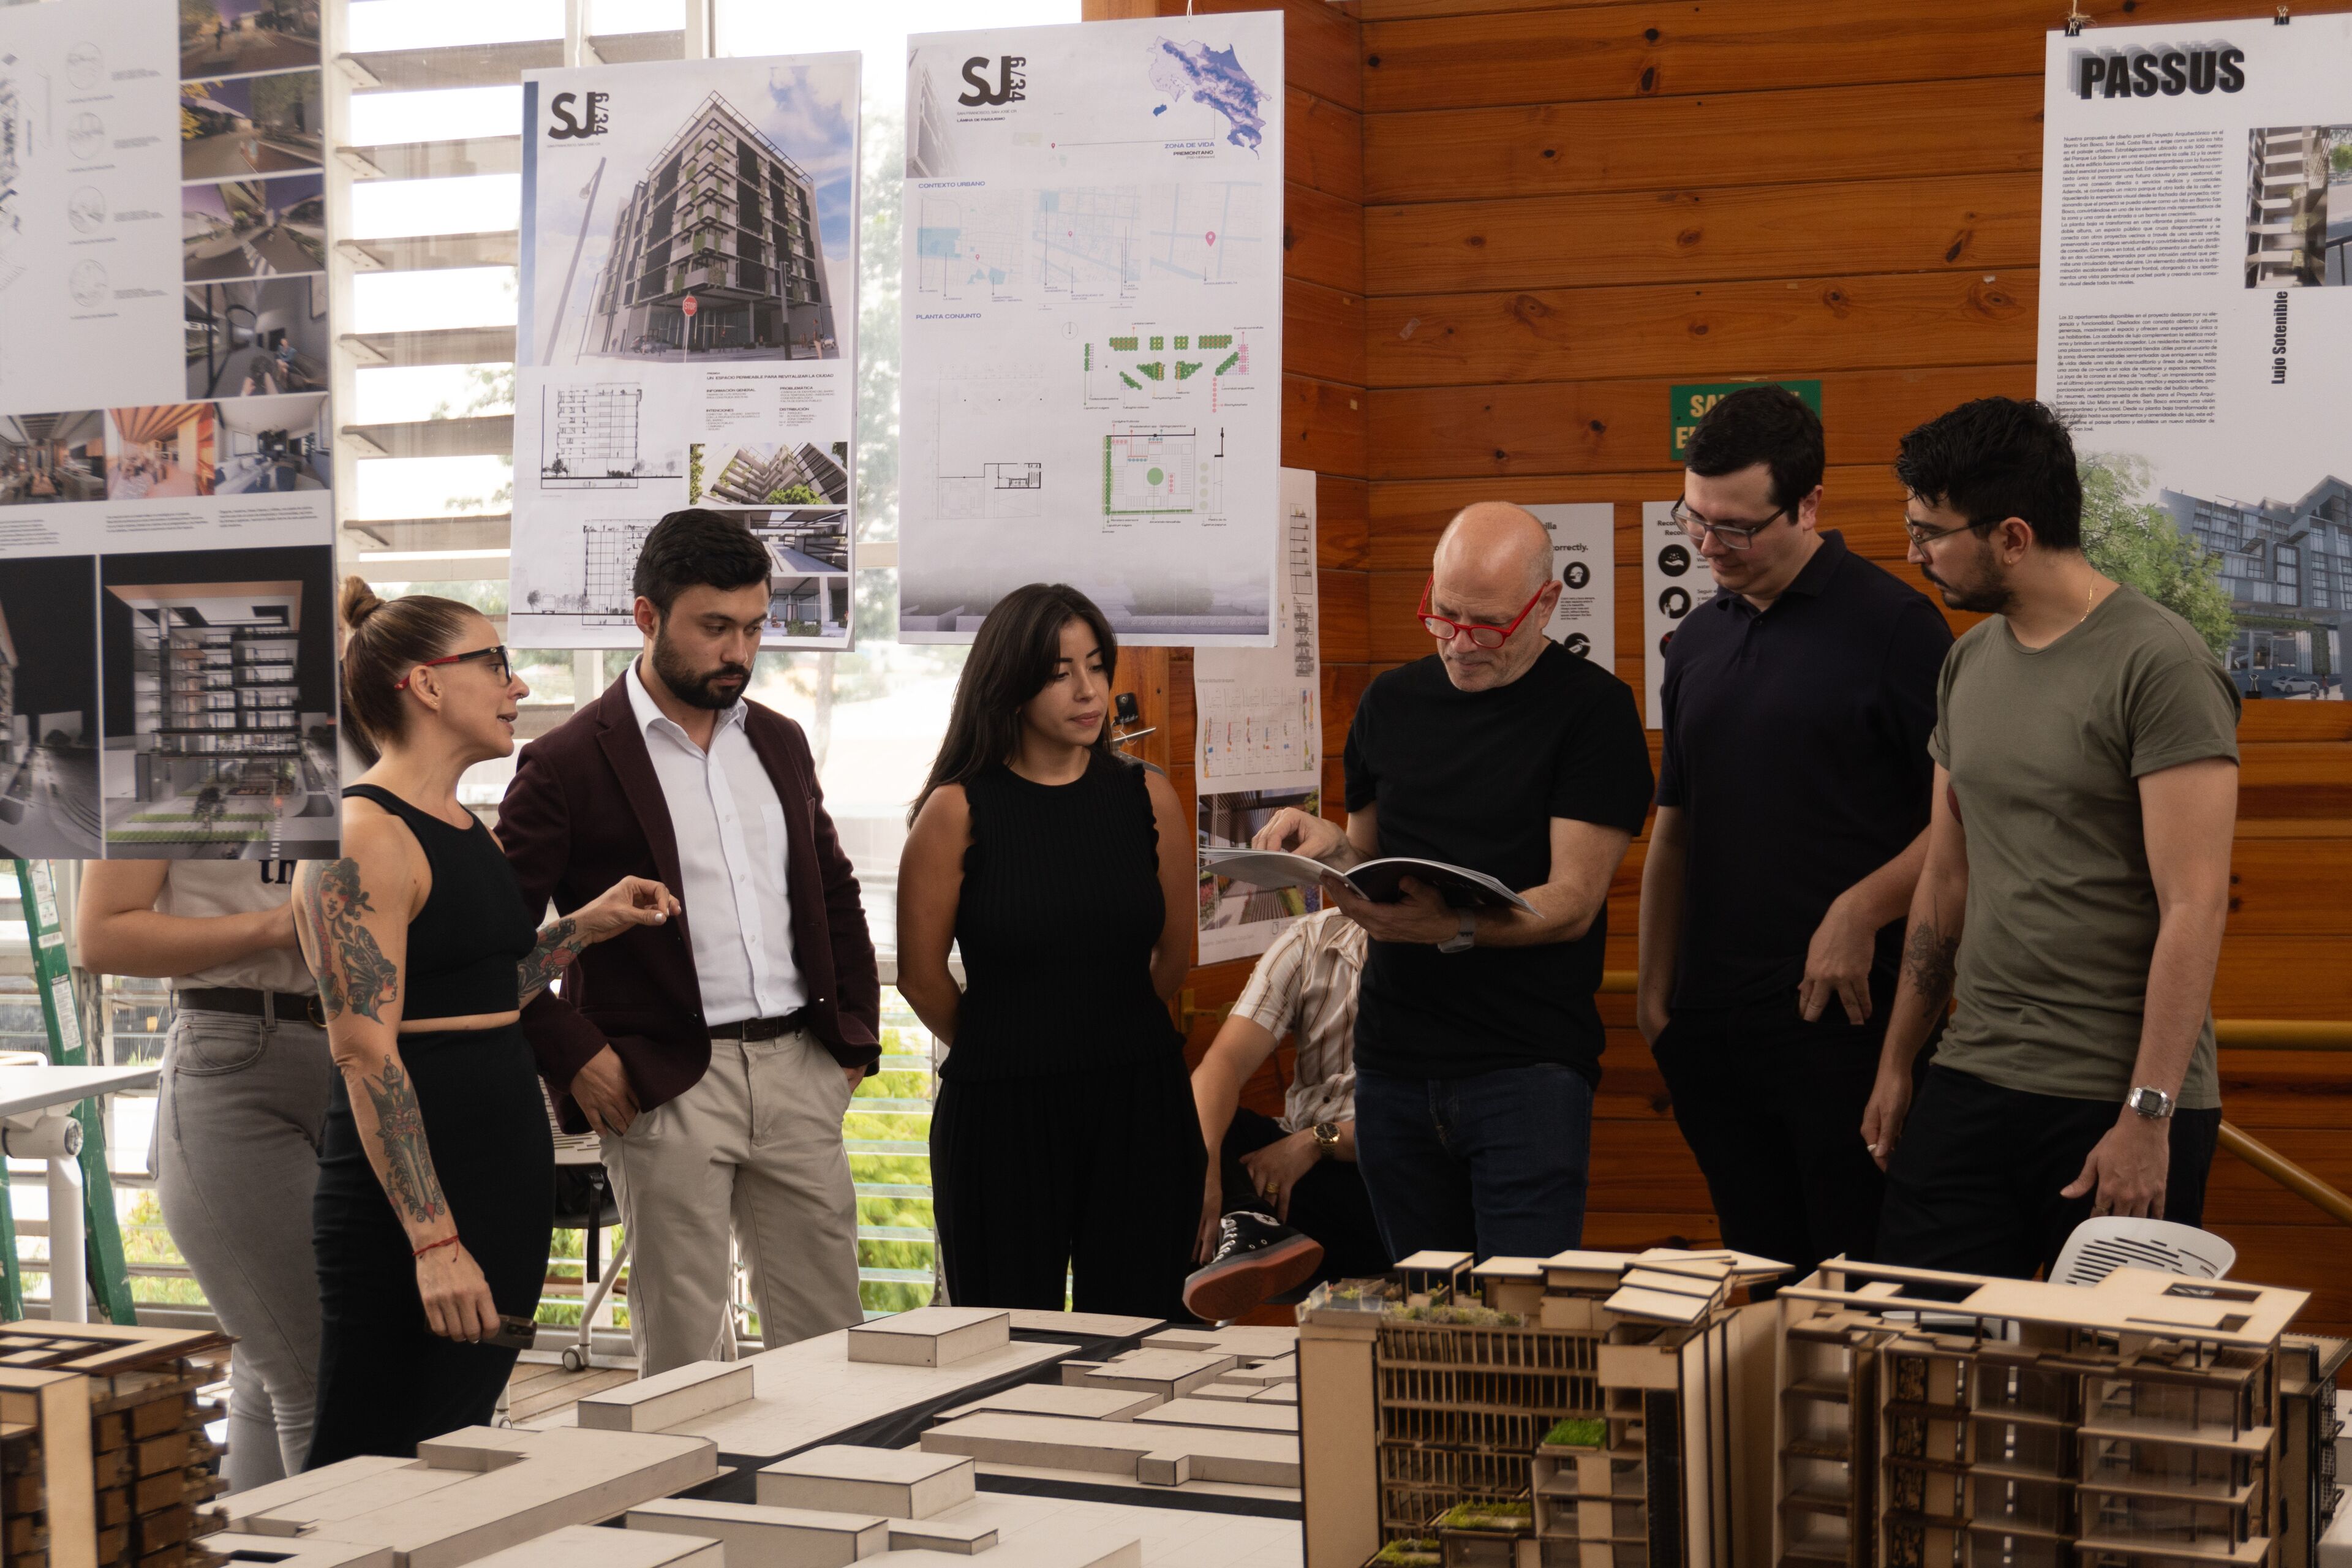 Group of focused architects discussing project details around scale models and design blueprints in a bright workspace.